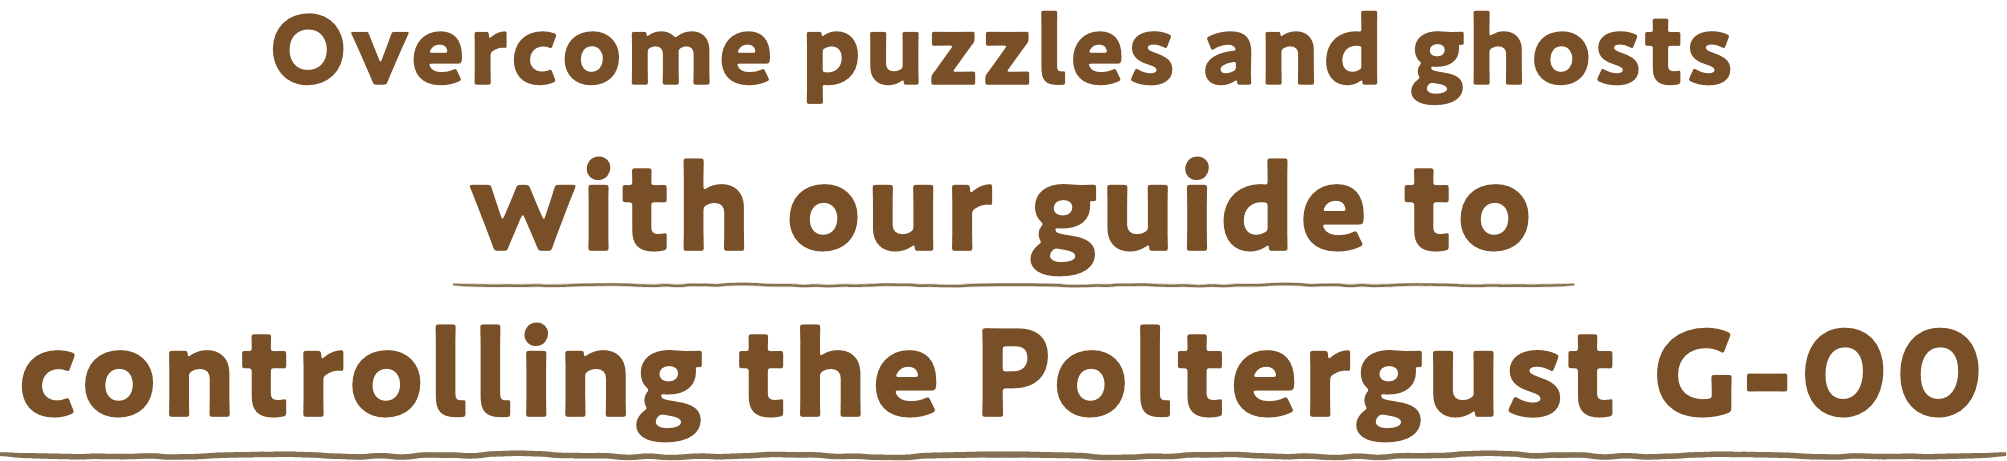 Overcome puzzles and ghosts with our guide to controlling  the Poltergust G-00